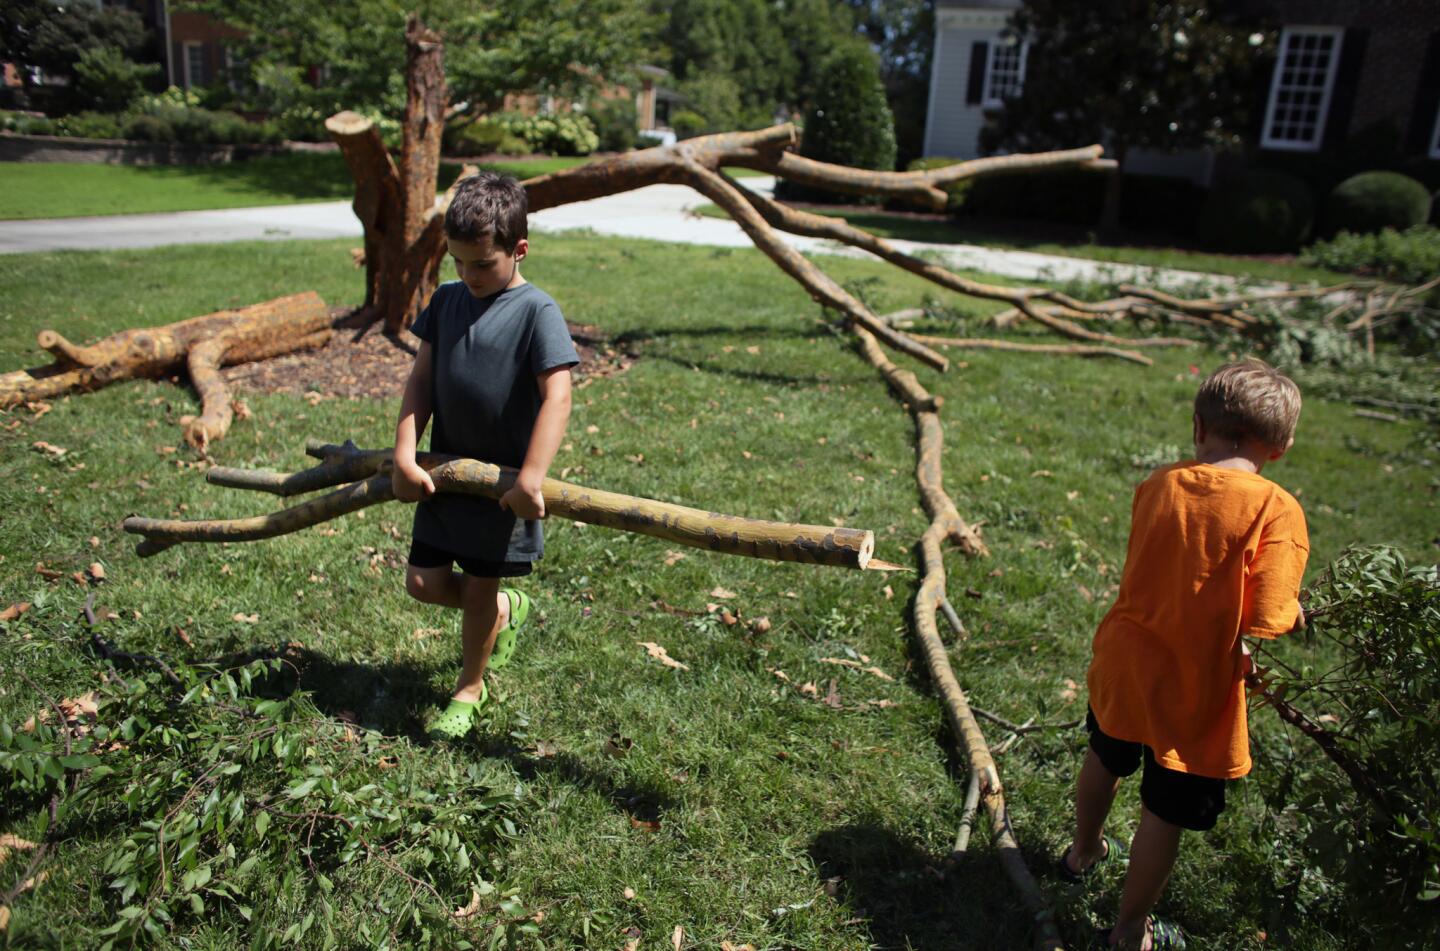 Cormac Worrall, 6, left, helps his father remove tree debris from their yard in Virginia Beach, Va, on Sunday, Sept. 4, 2016.